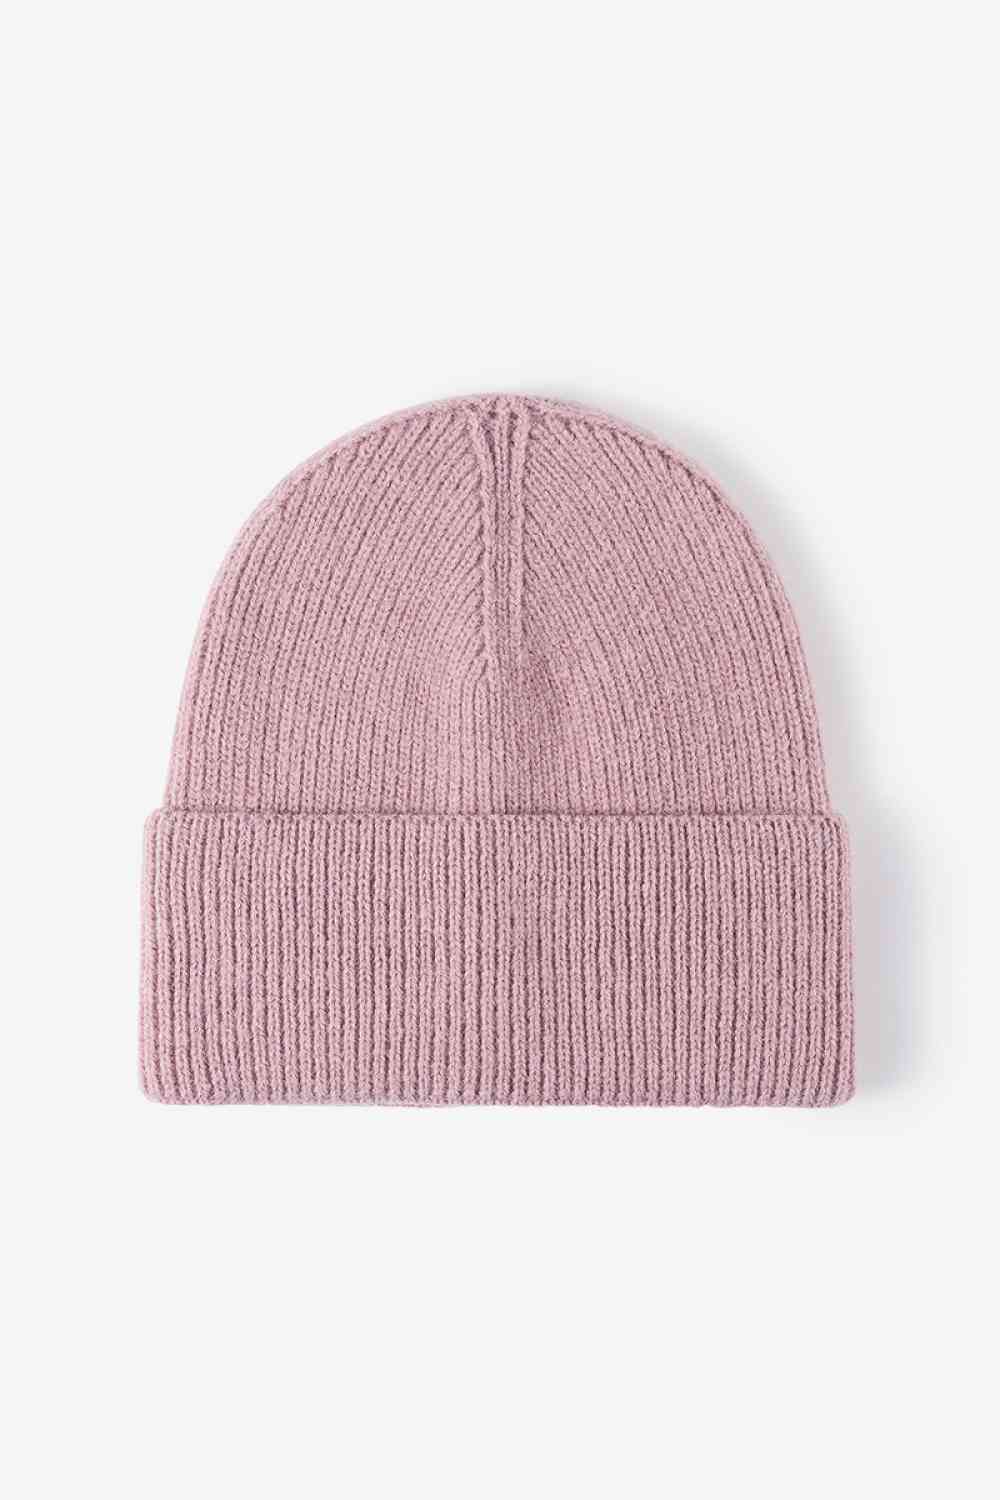 Warm In Chilly Days Knit Beanie Pink One Size